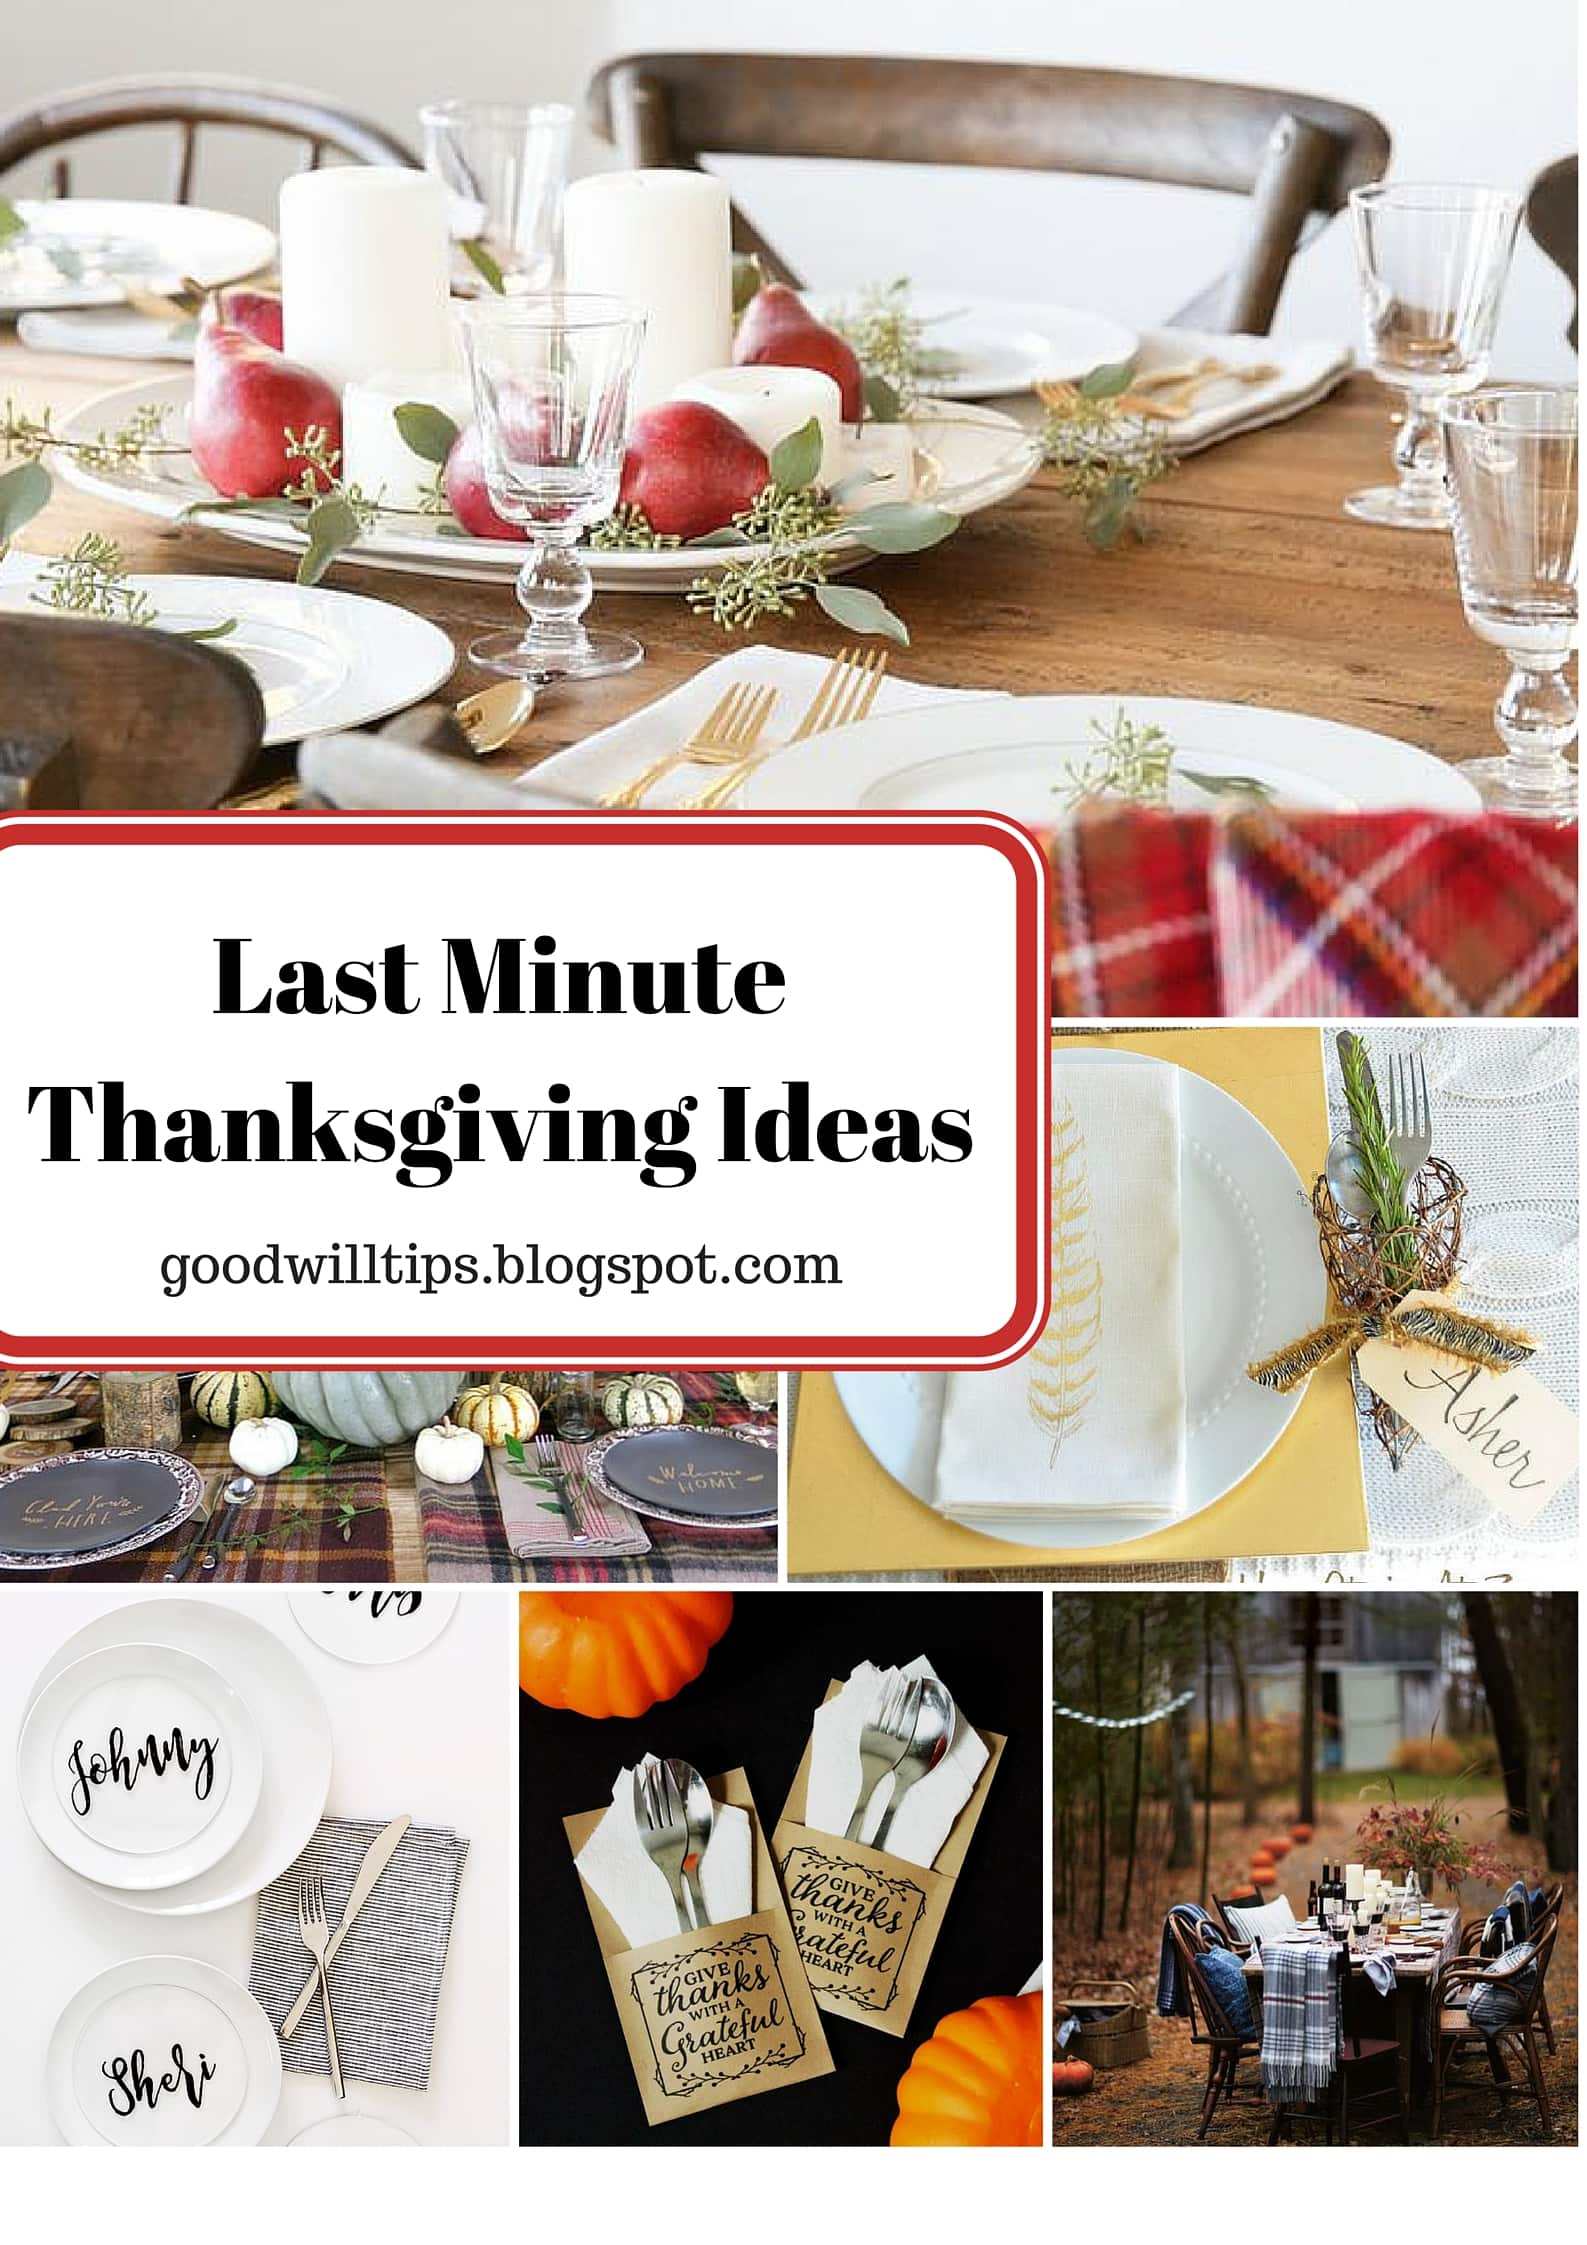 Last Minute Thanksgiving Tablescape Ideas from MomAdvice.com